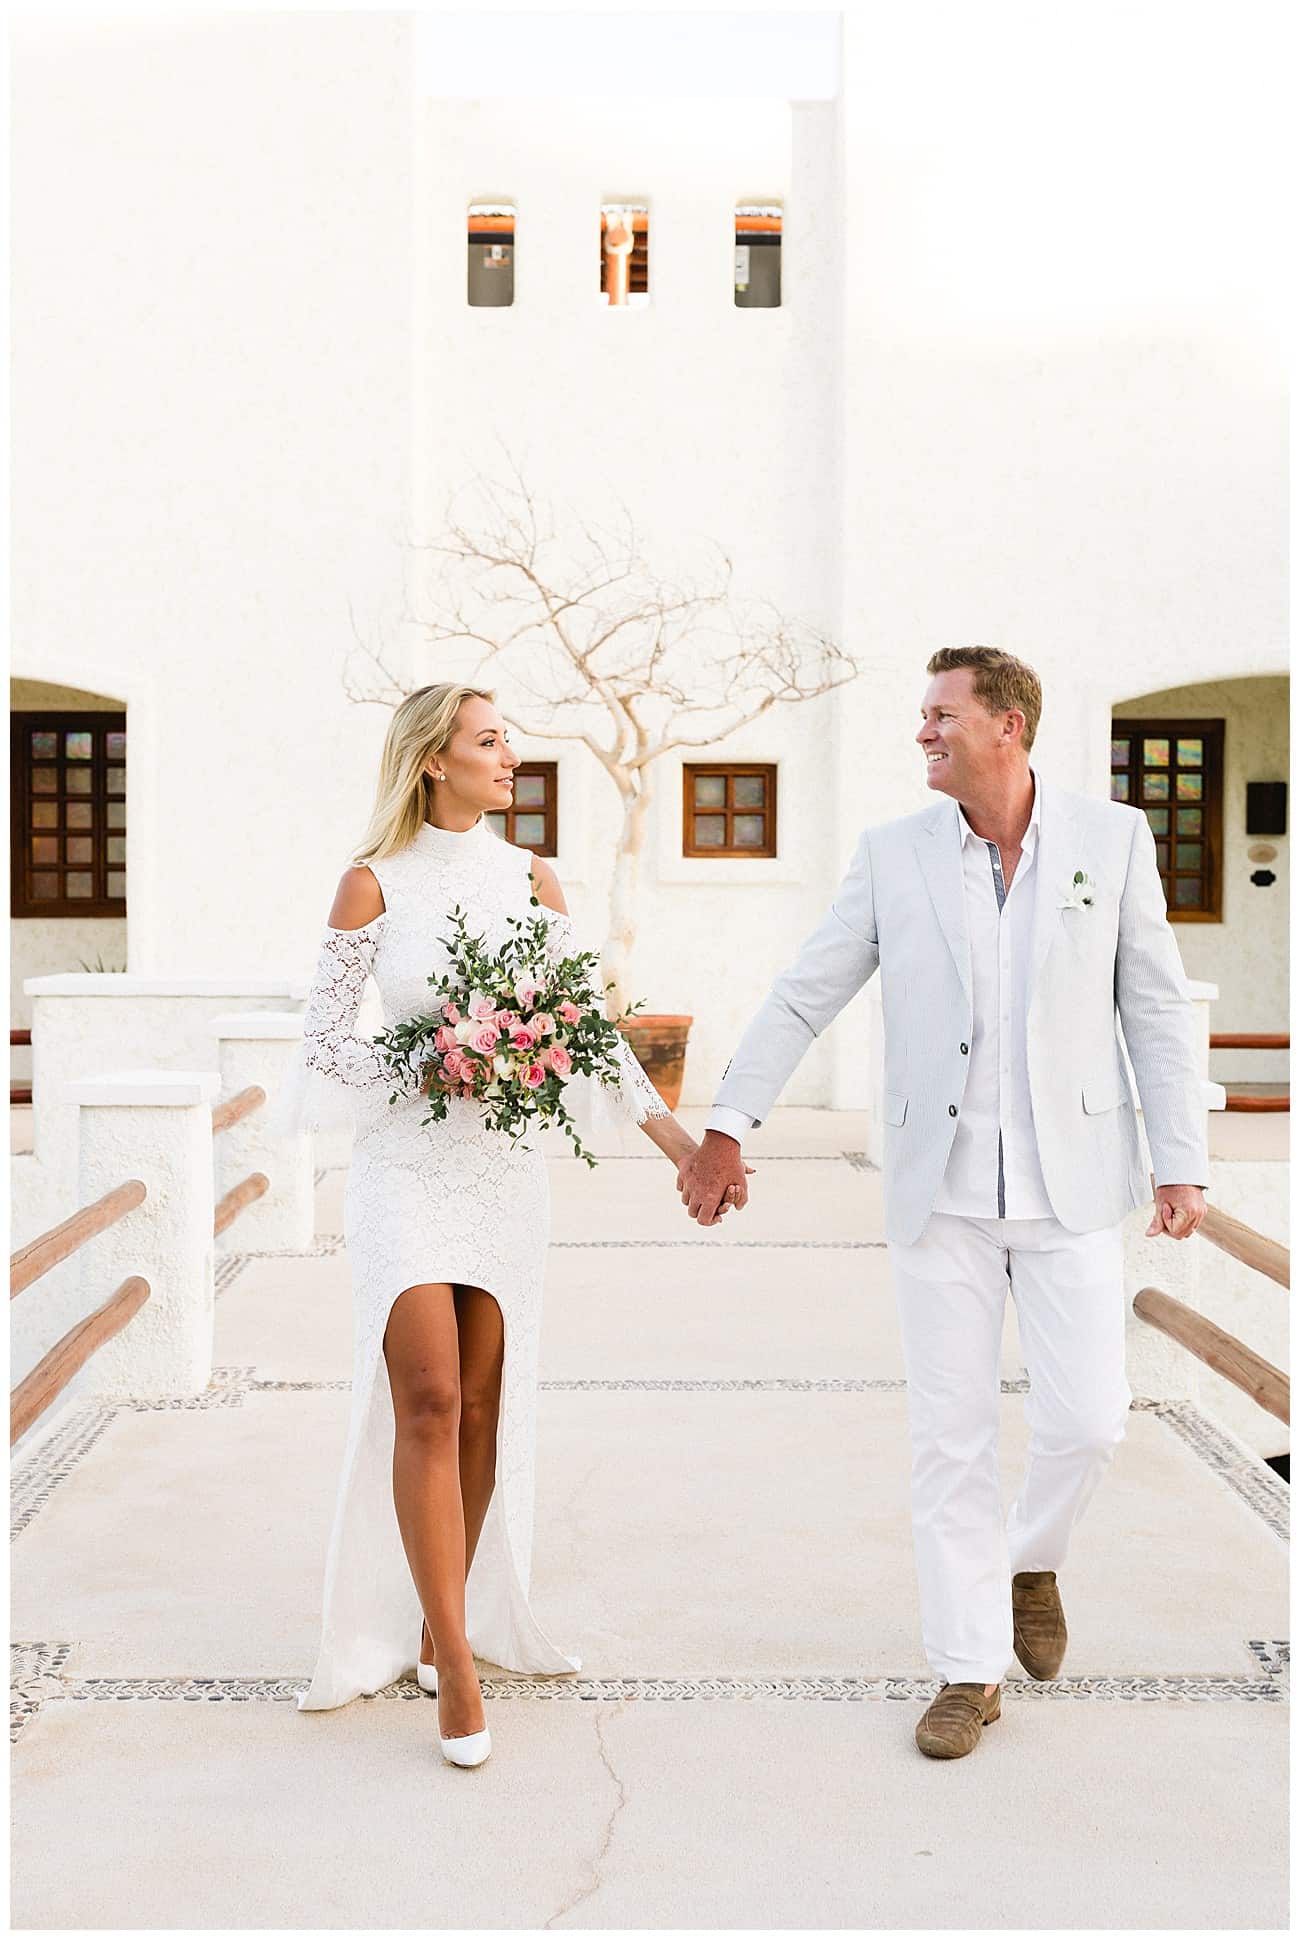 Engagement in Cabo